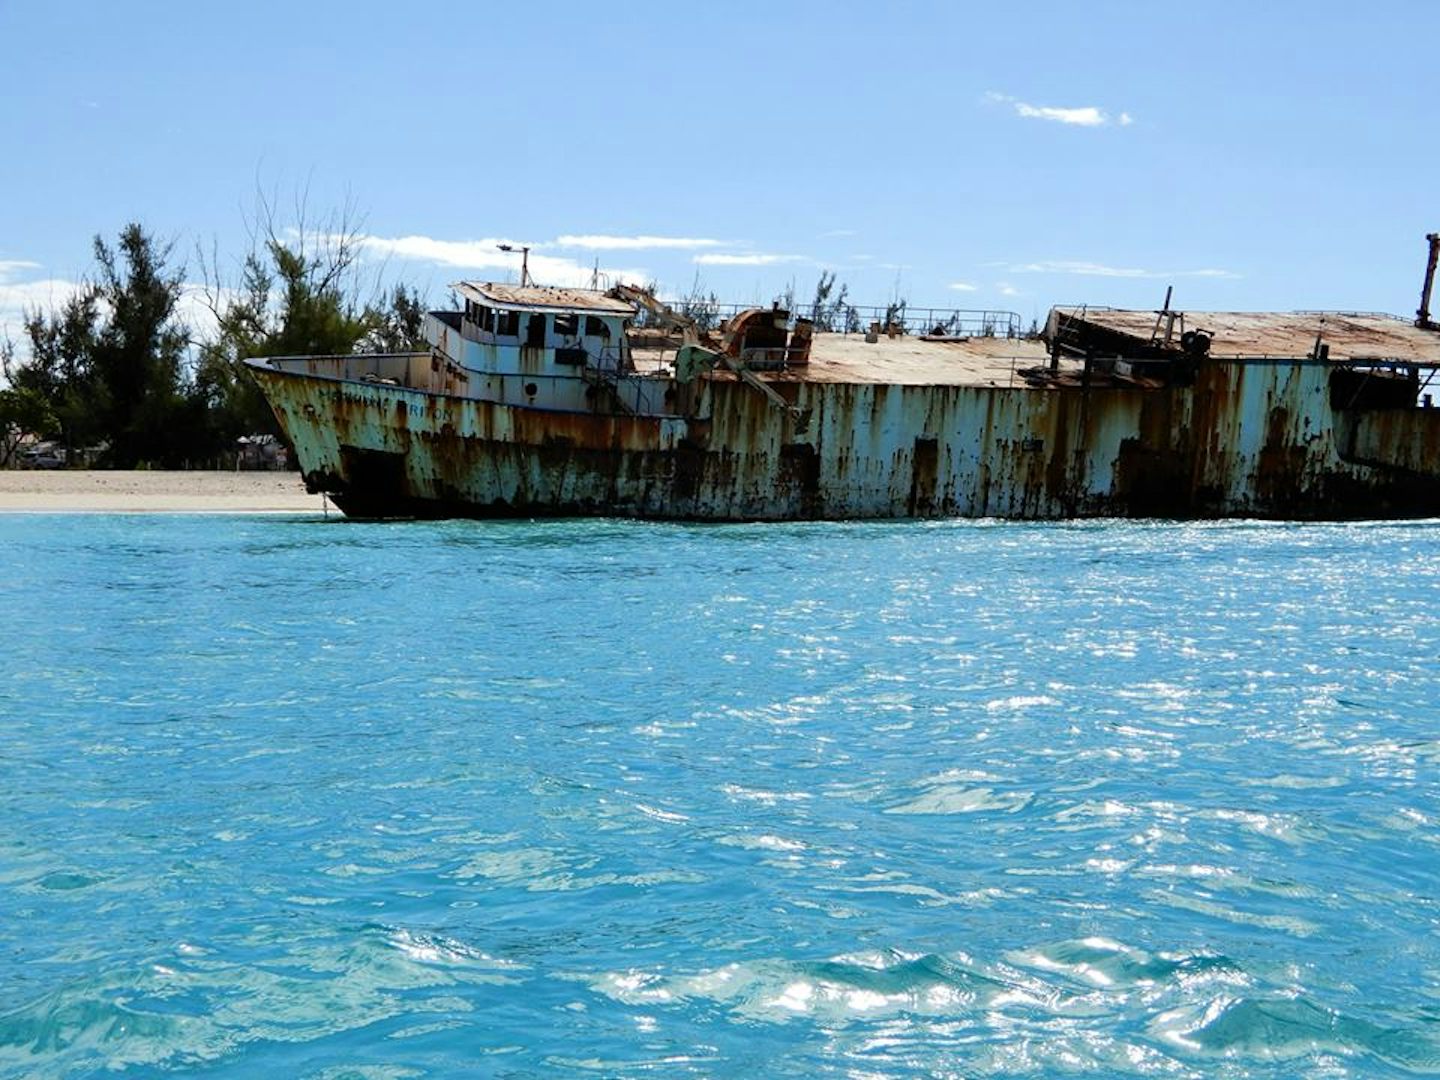 Wreck in Governor's Bay, Grand Turk.